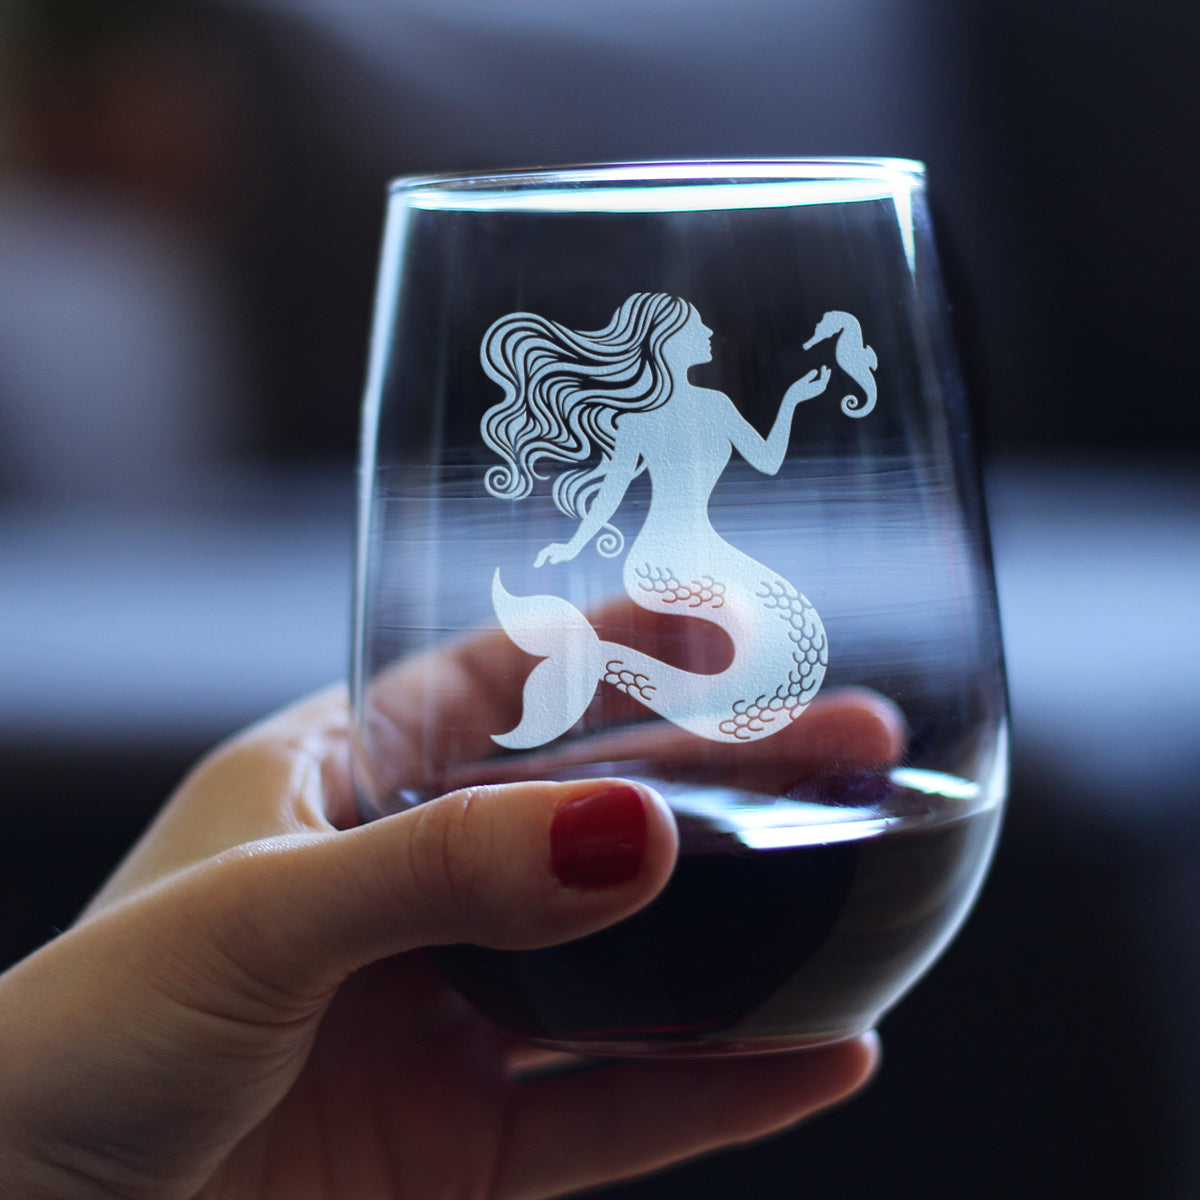 Mermaid Stemless Wine Glass - Fun Mermaids Themed Decor and Gifts for Beach Lovers - Large 17 Oz Glasses